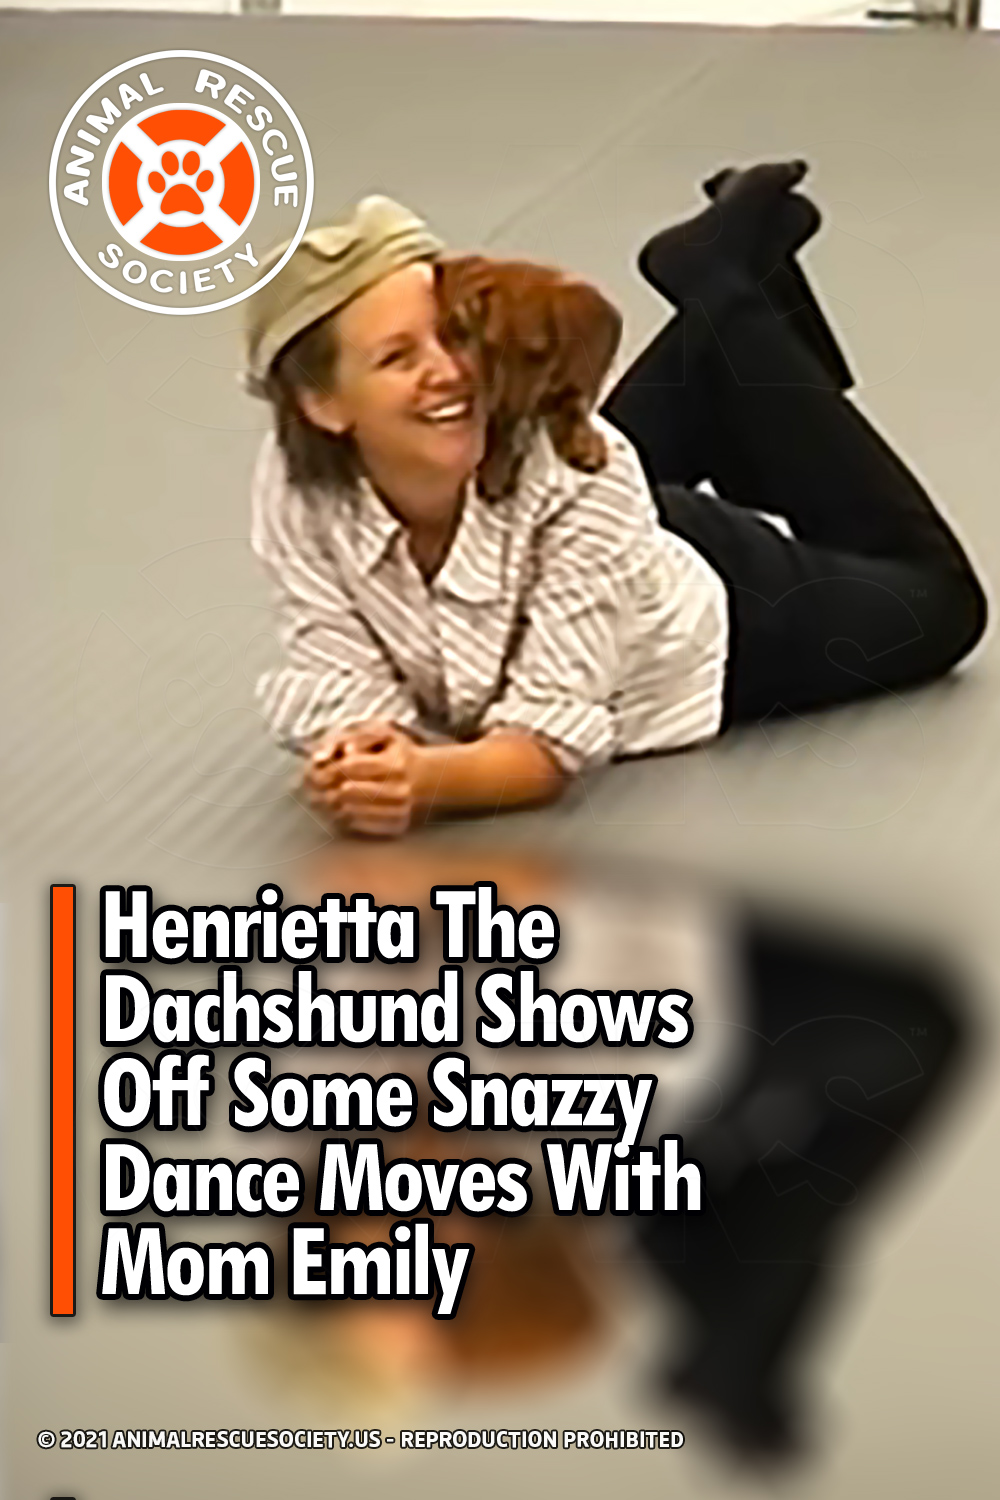 Henrietta The Dachshund Shows Off Some Snazzy Dance Moves With Mom Emily